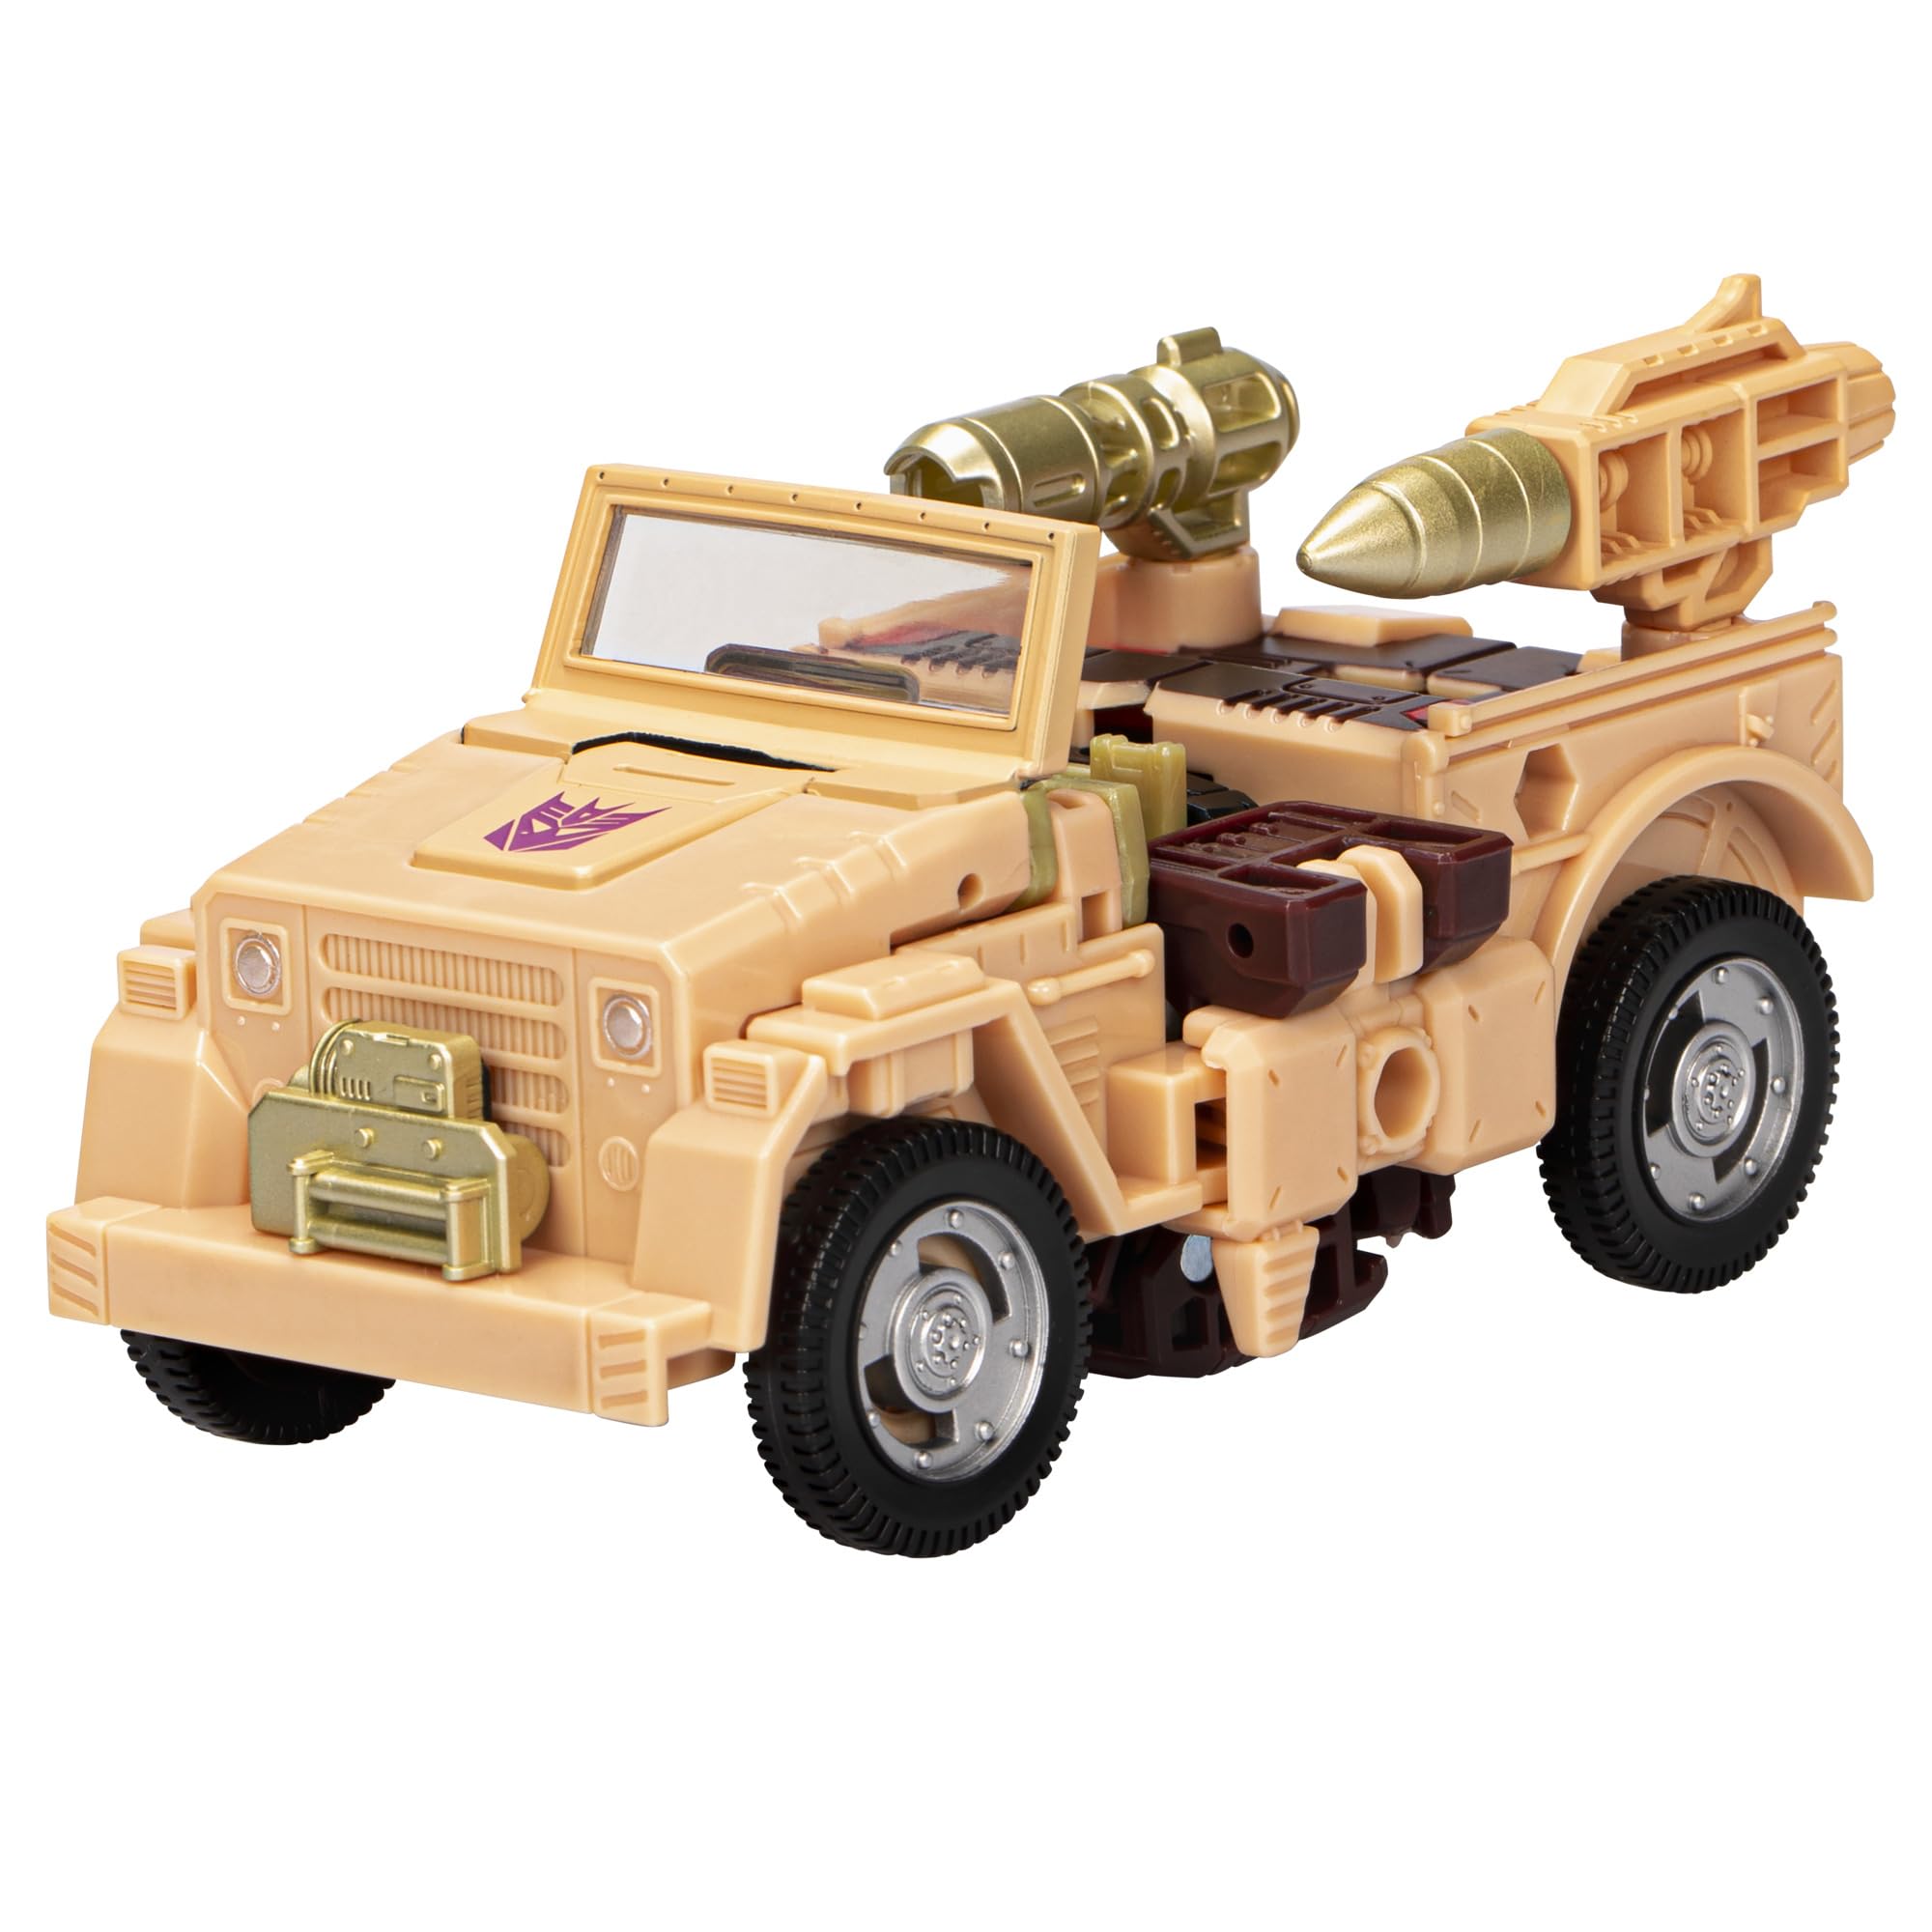 Transformers Toys Legacy Evolution Deluxe Class Detritus Toy, 5.5-inch, Action Figure for Boys and Girls Ages 8 and Up